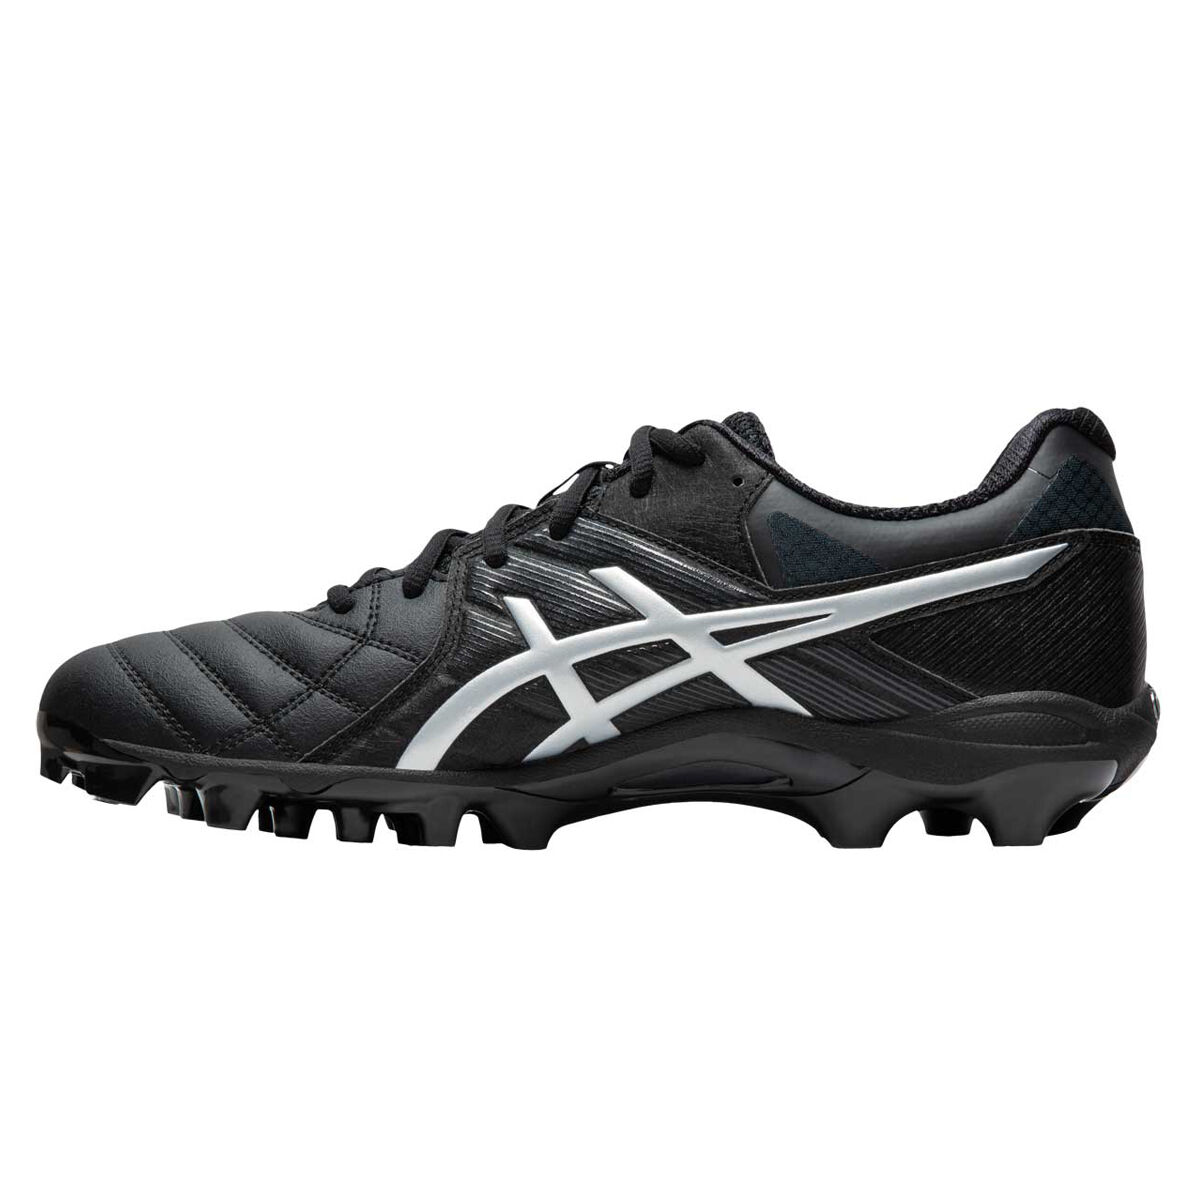 asics lethal 18 football boots